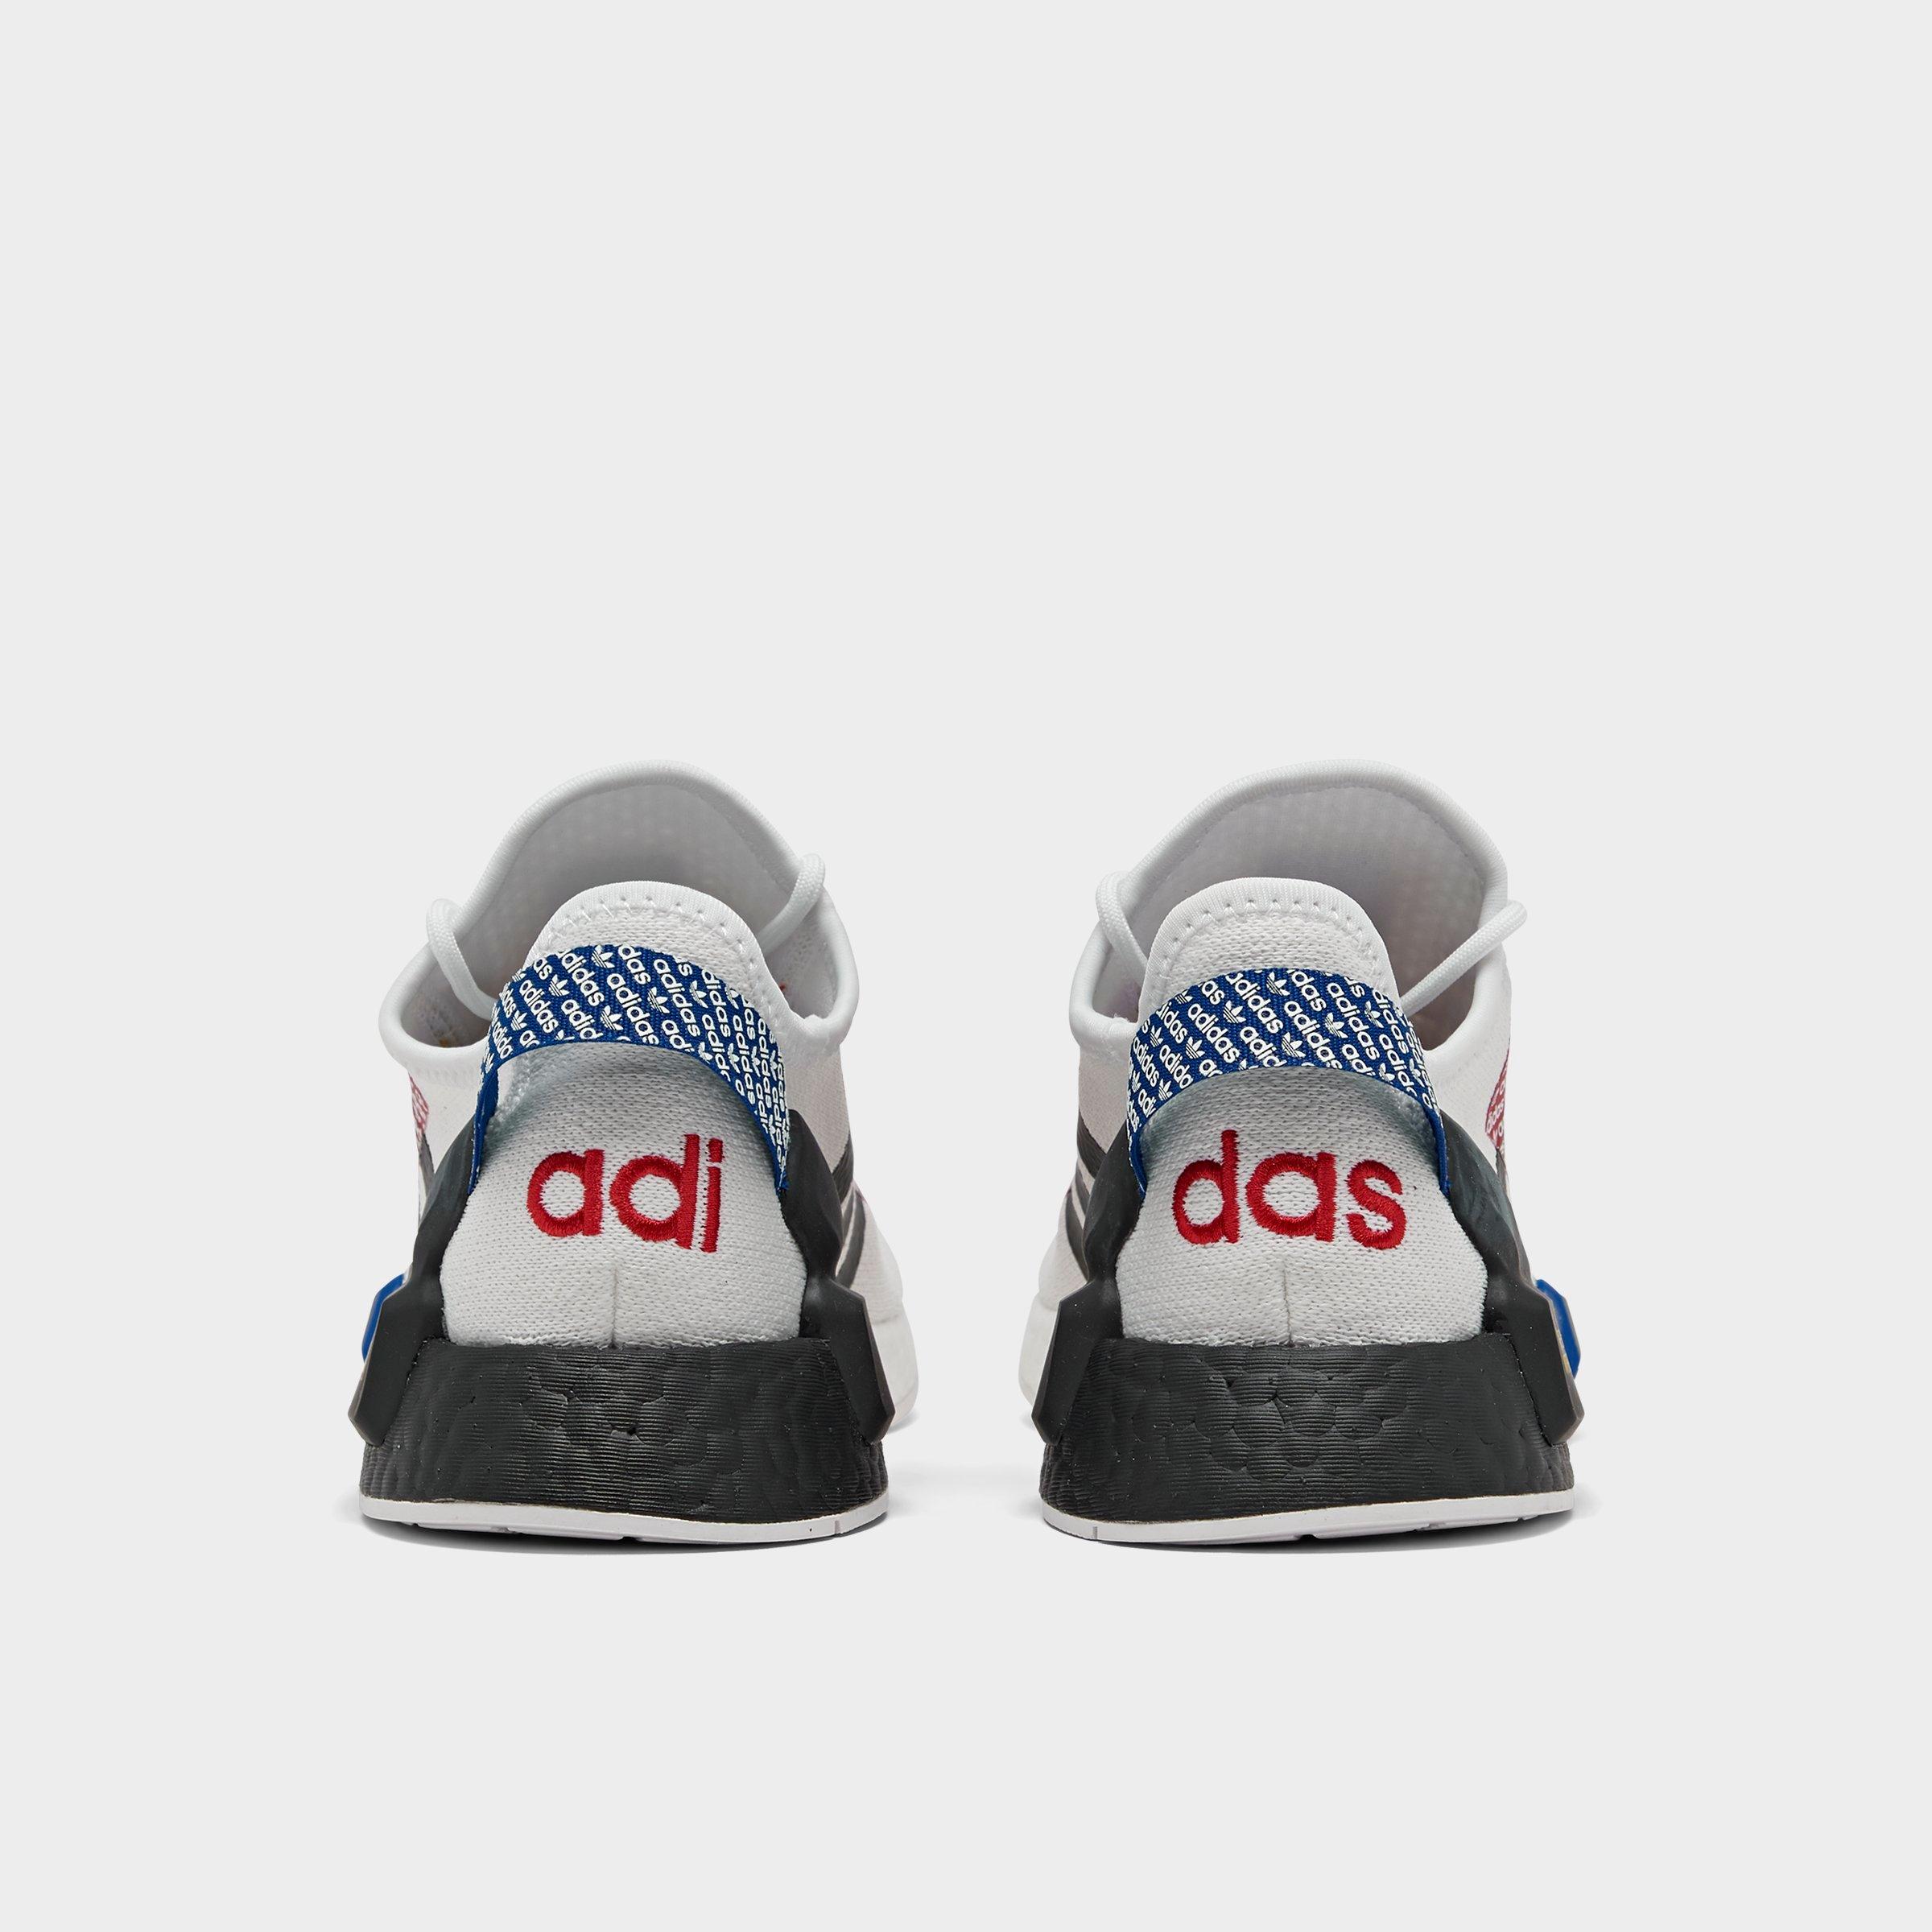 nmd kid shoes